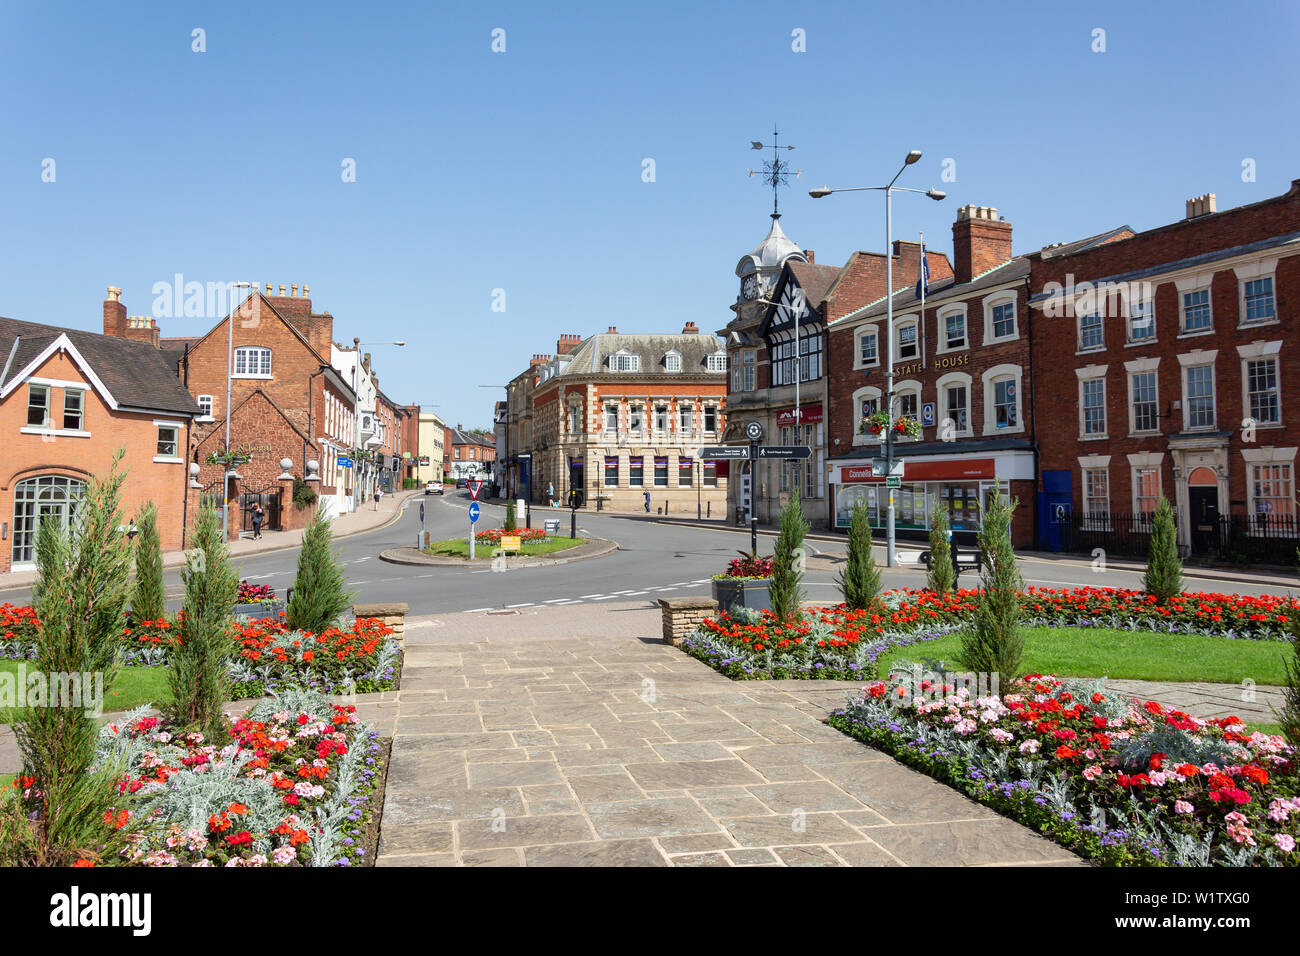 High Street, Old Town. Sutton Coldfield, West Midlands, England, United Kingdom Stock Photo